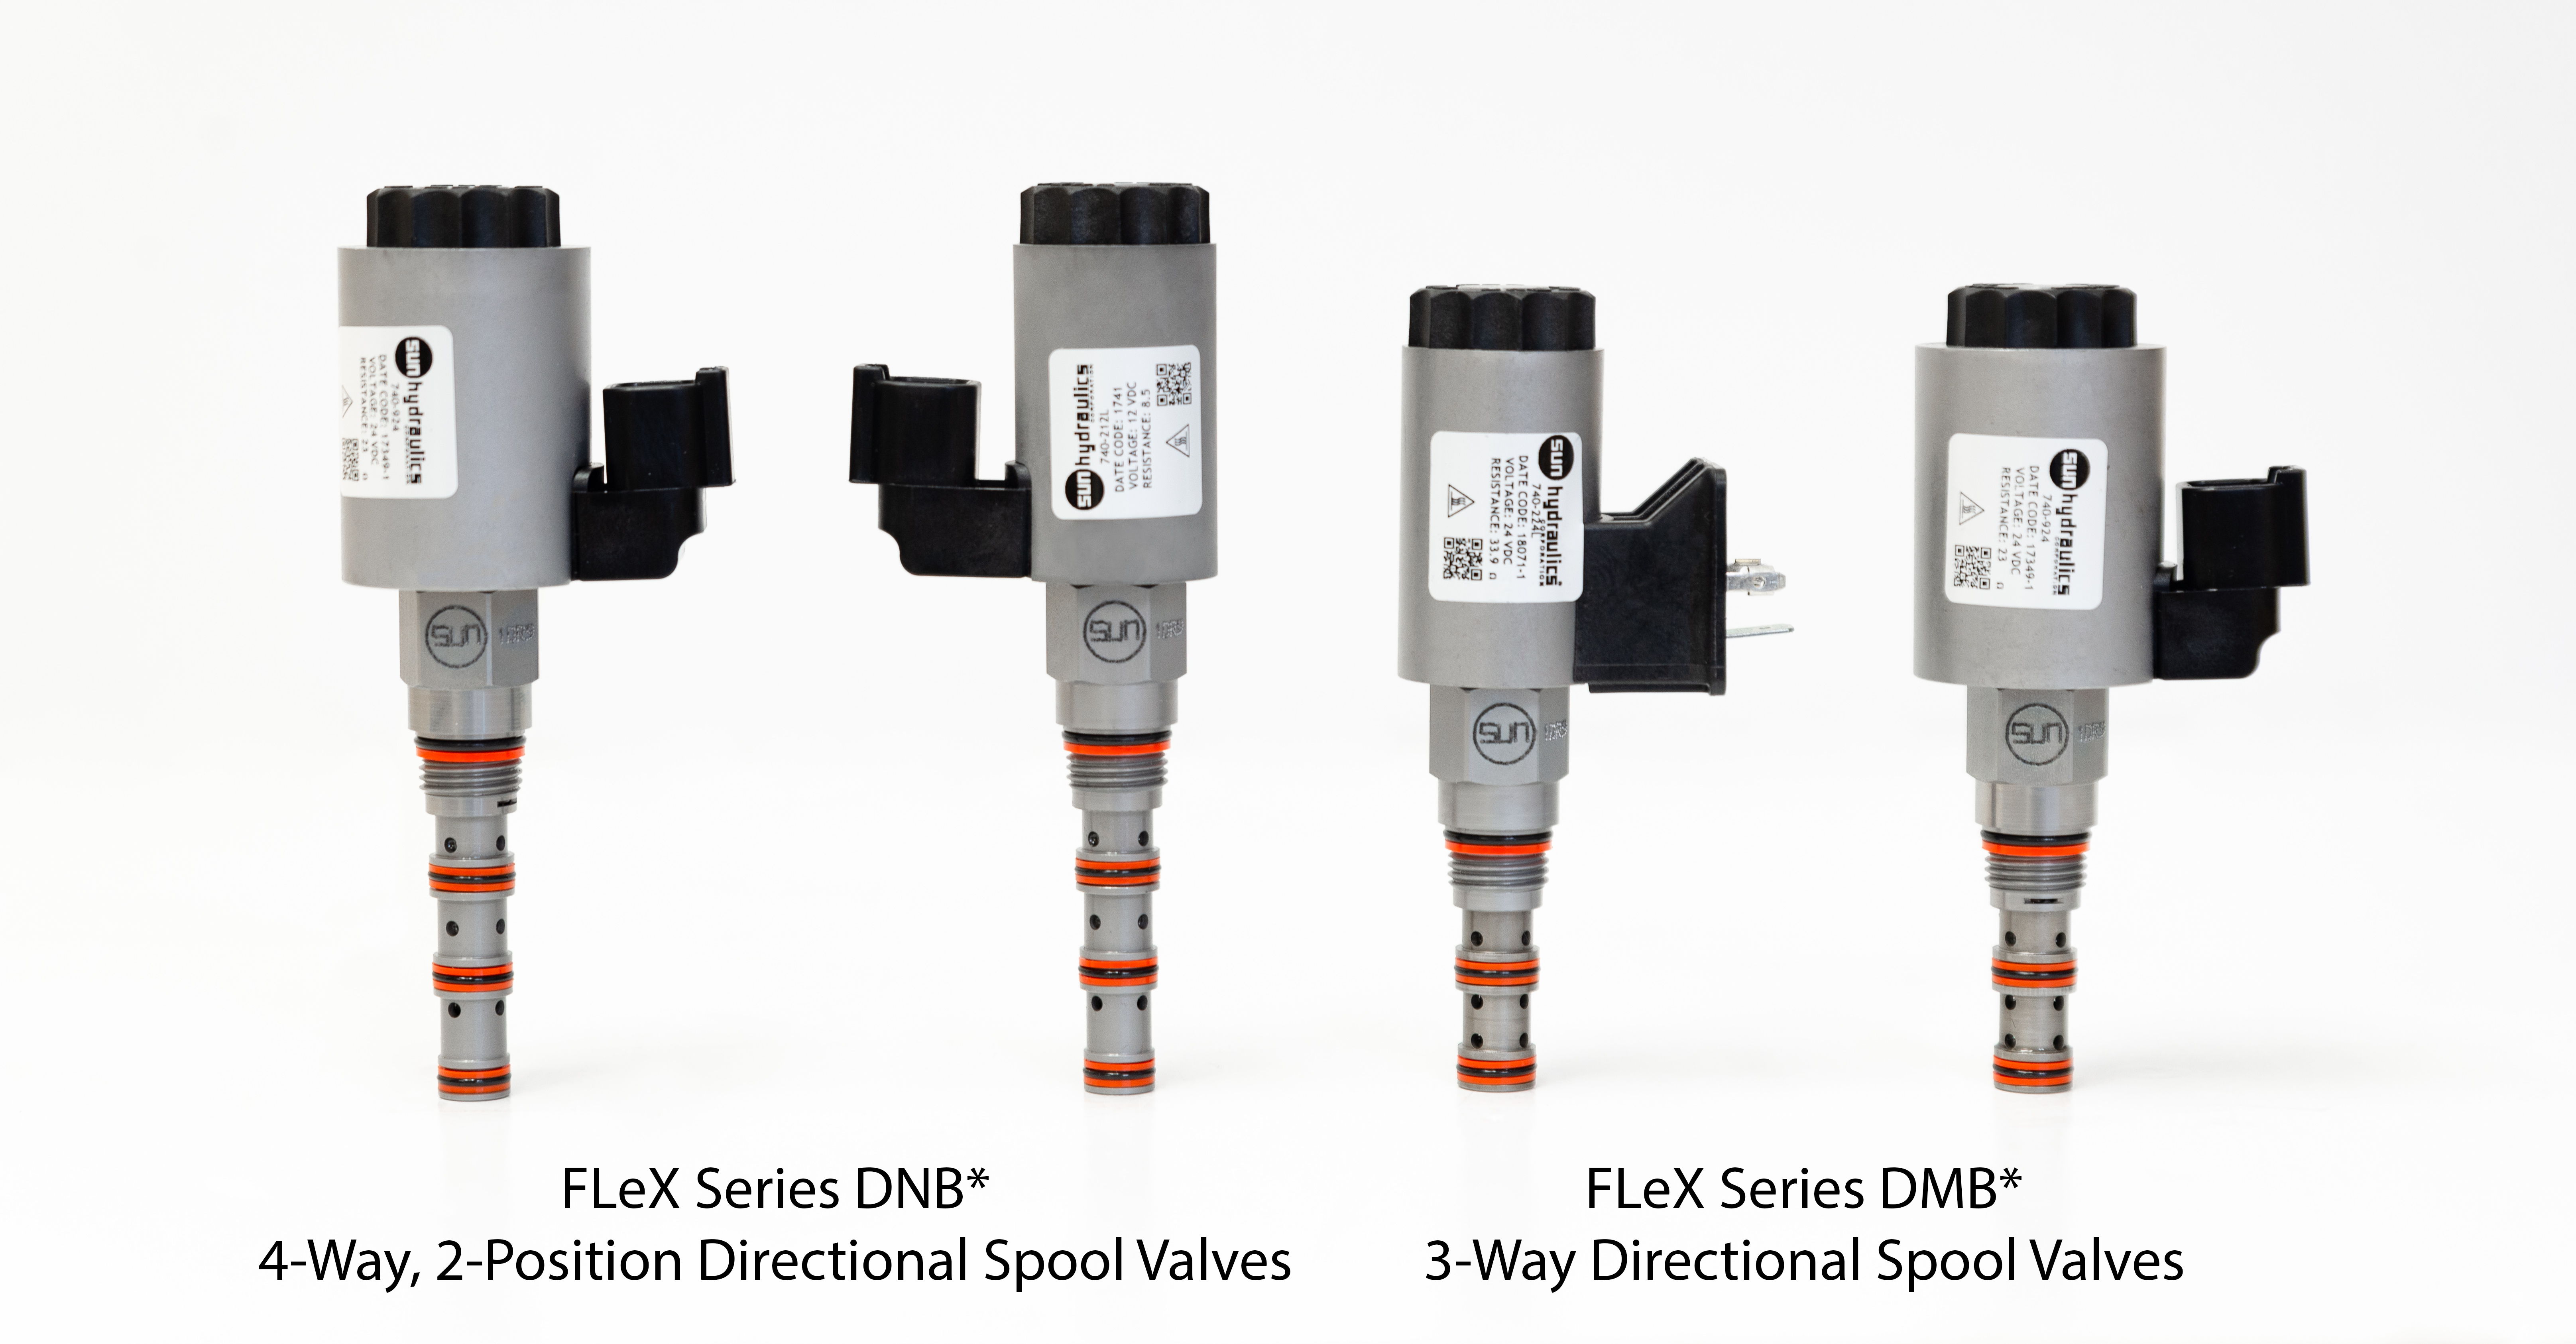 New FLeX Series Directional Valves, Series DNB* and DMB*